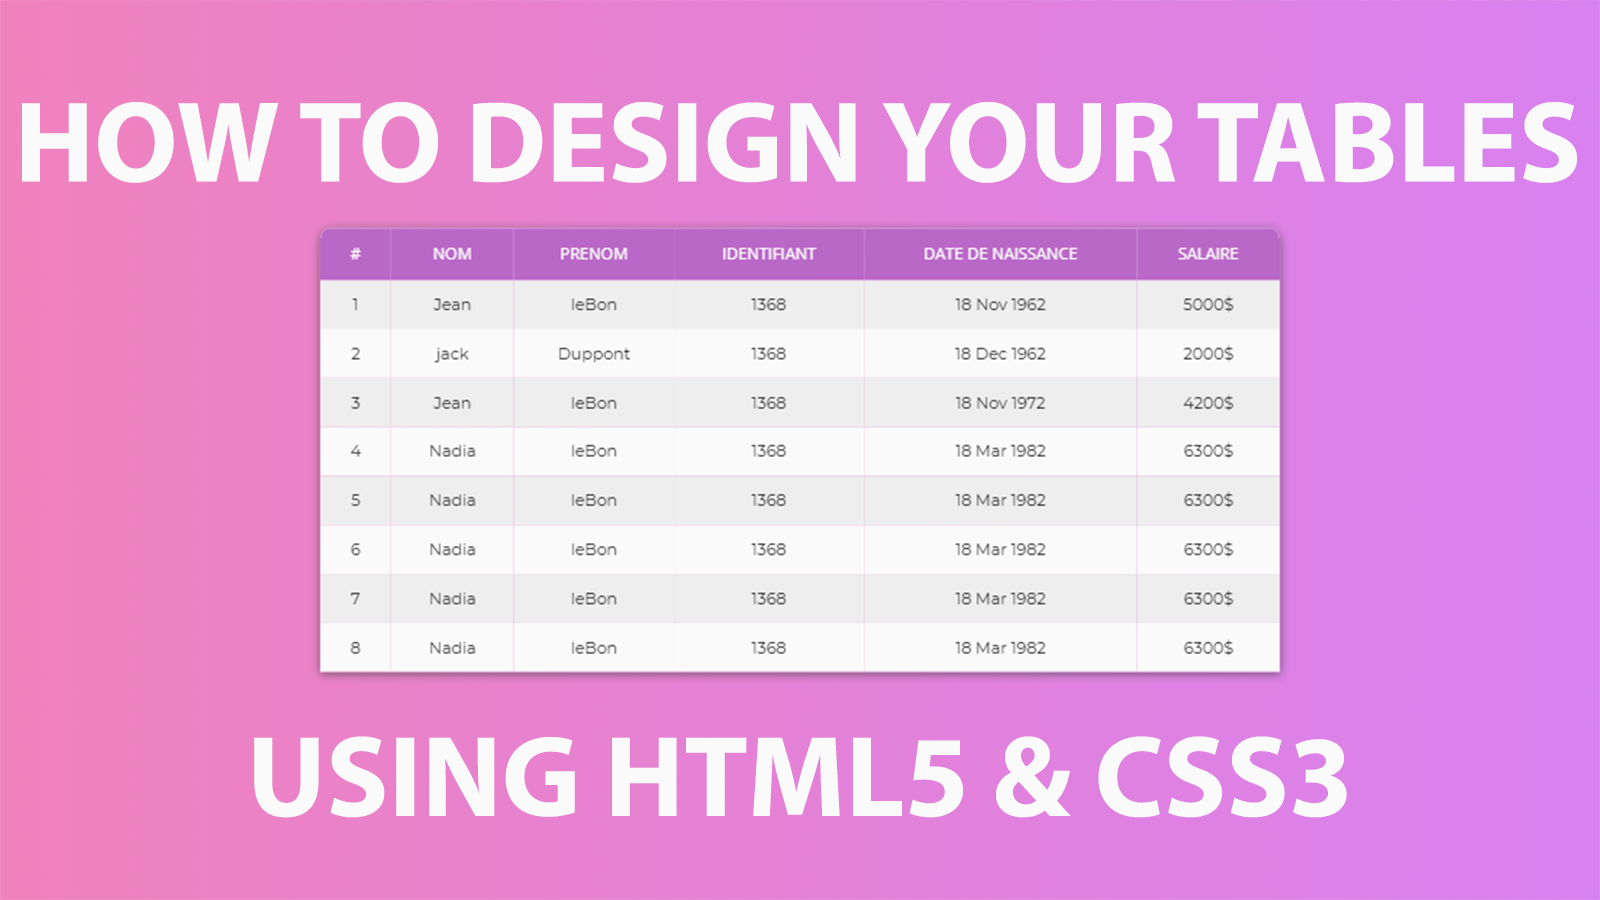 HOW TO DESIGN TABLES USING HTML AND CSS DoctorCode